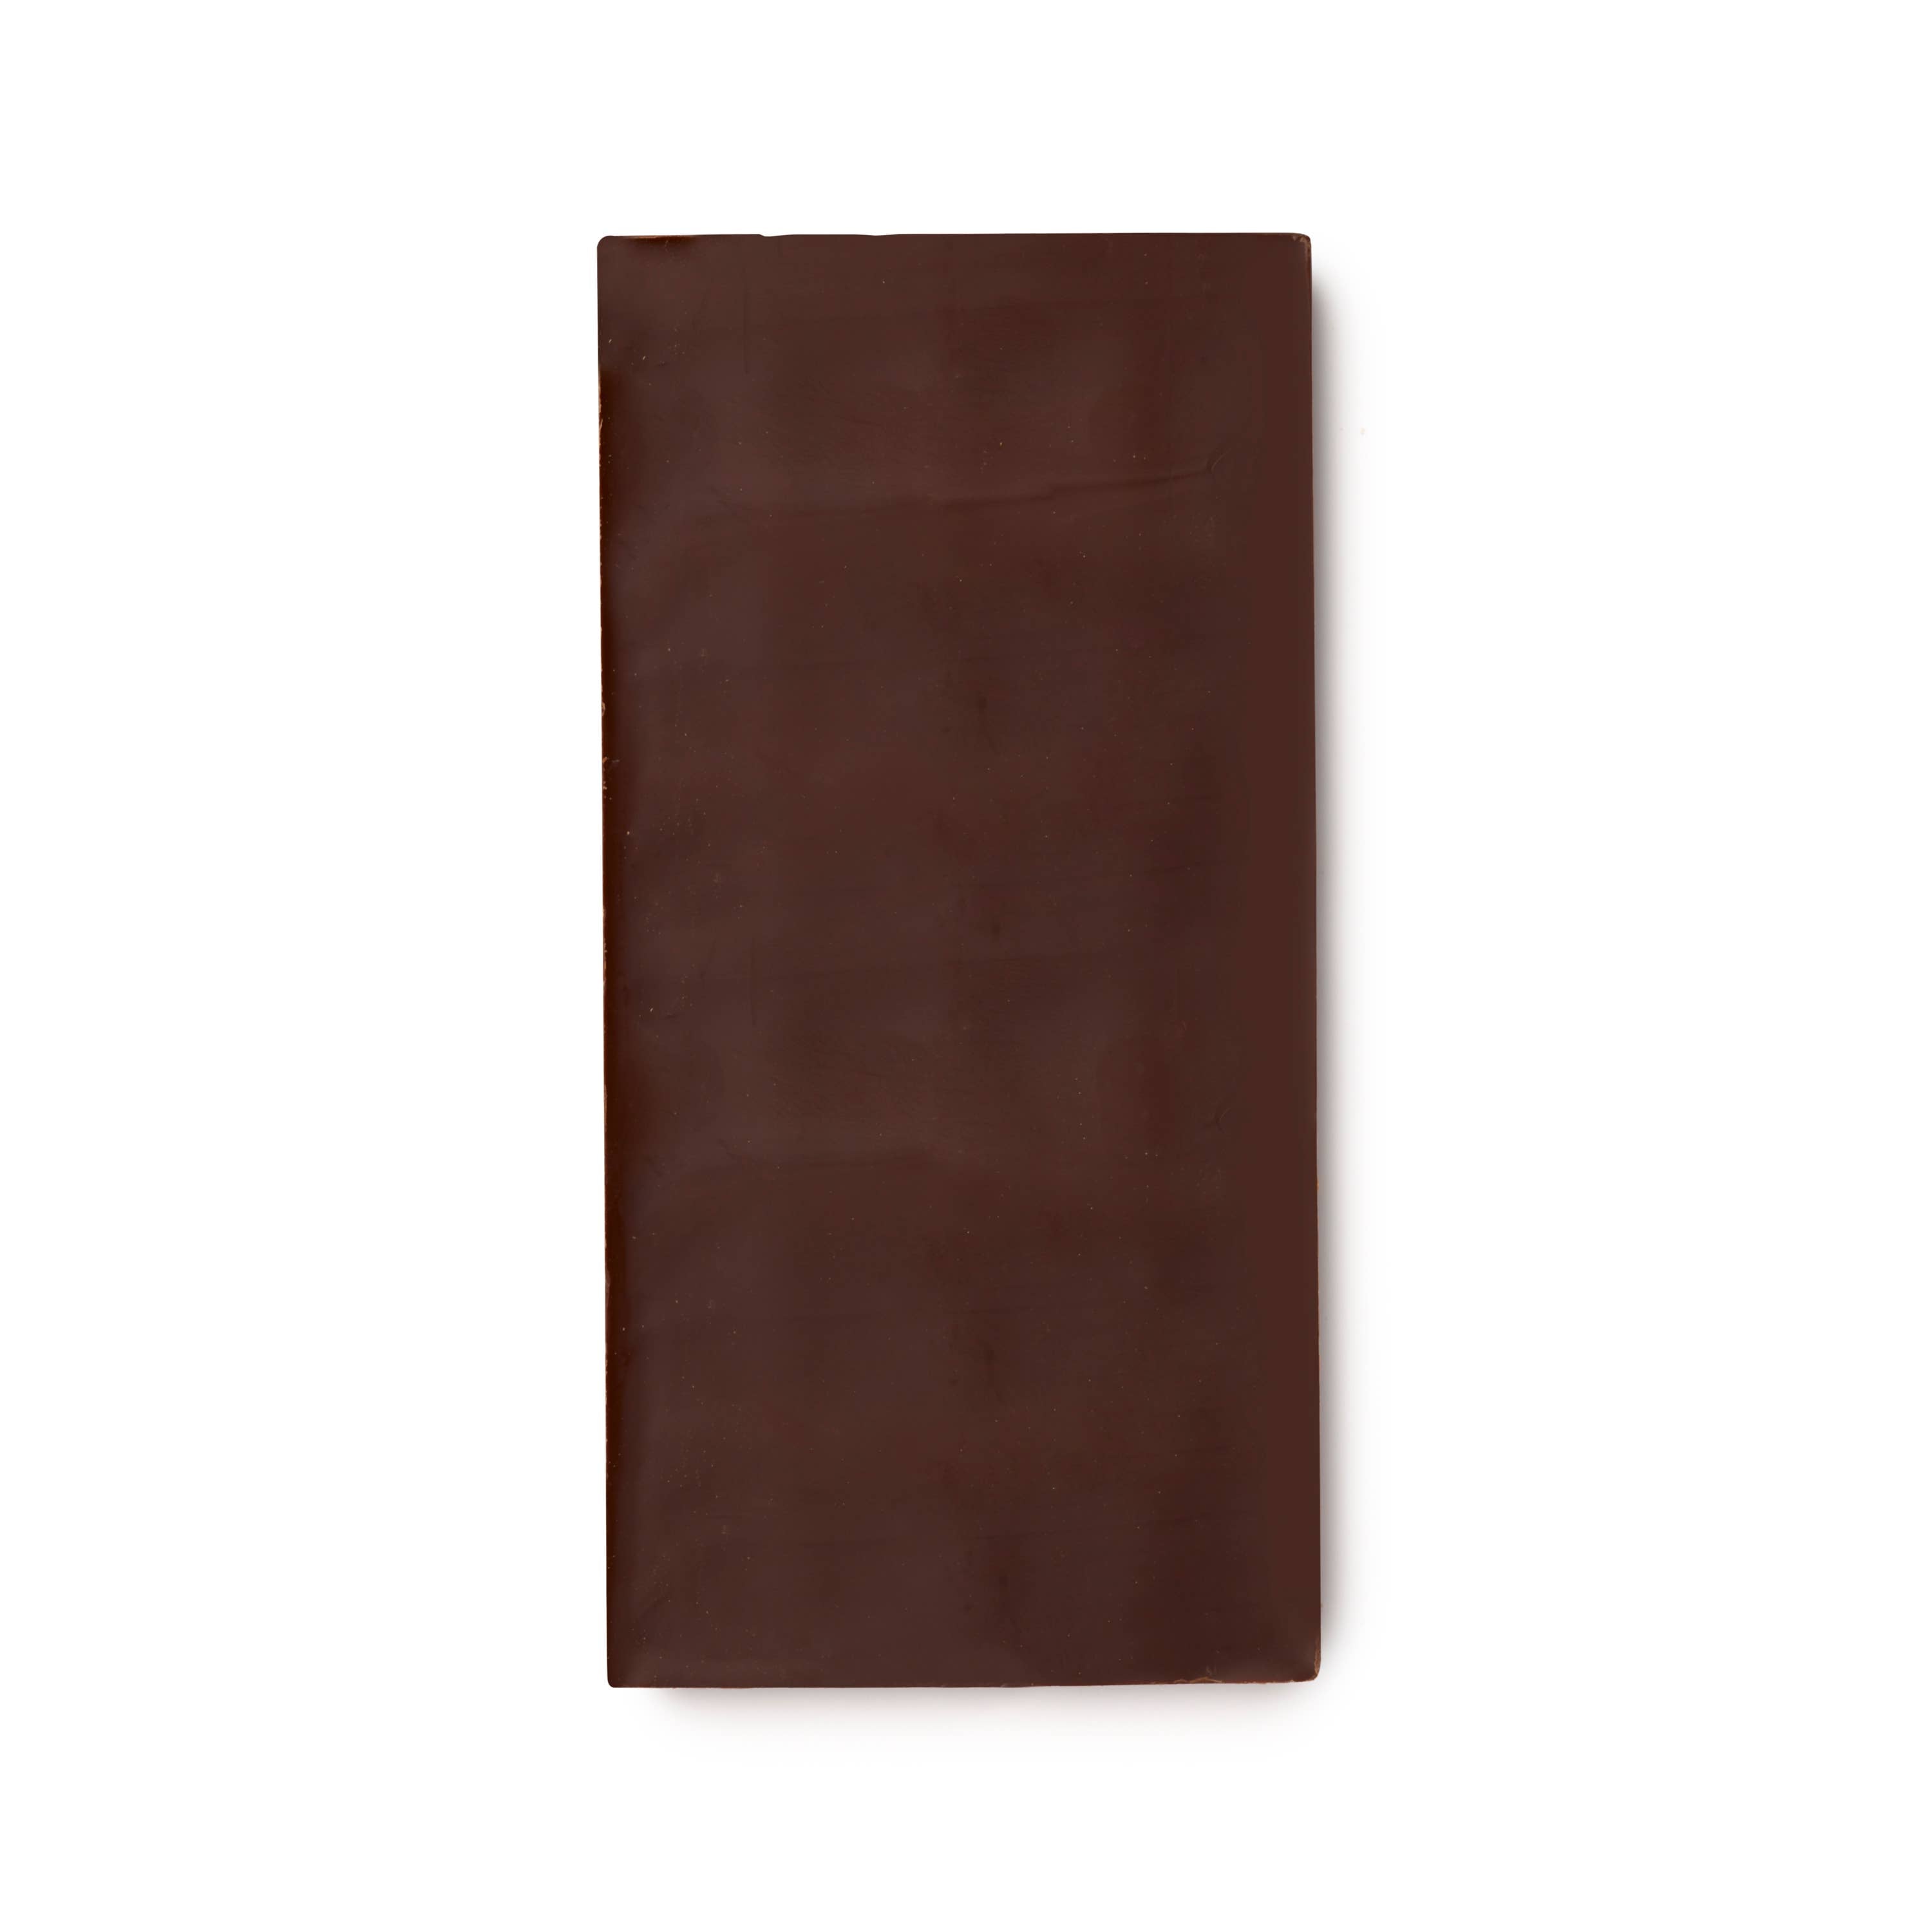 Colombia 61% Chocolate Bar